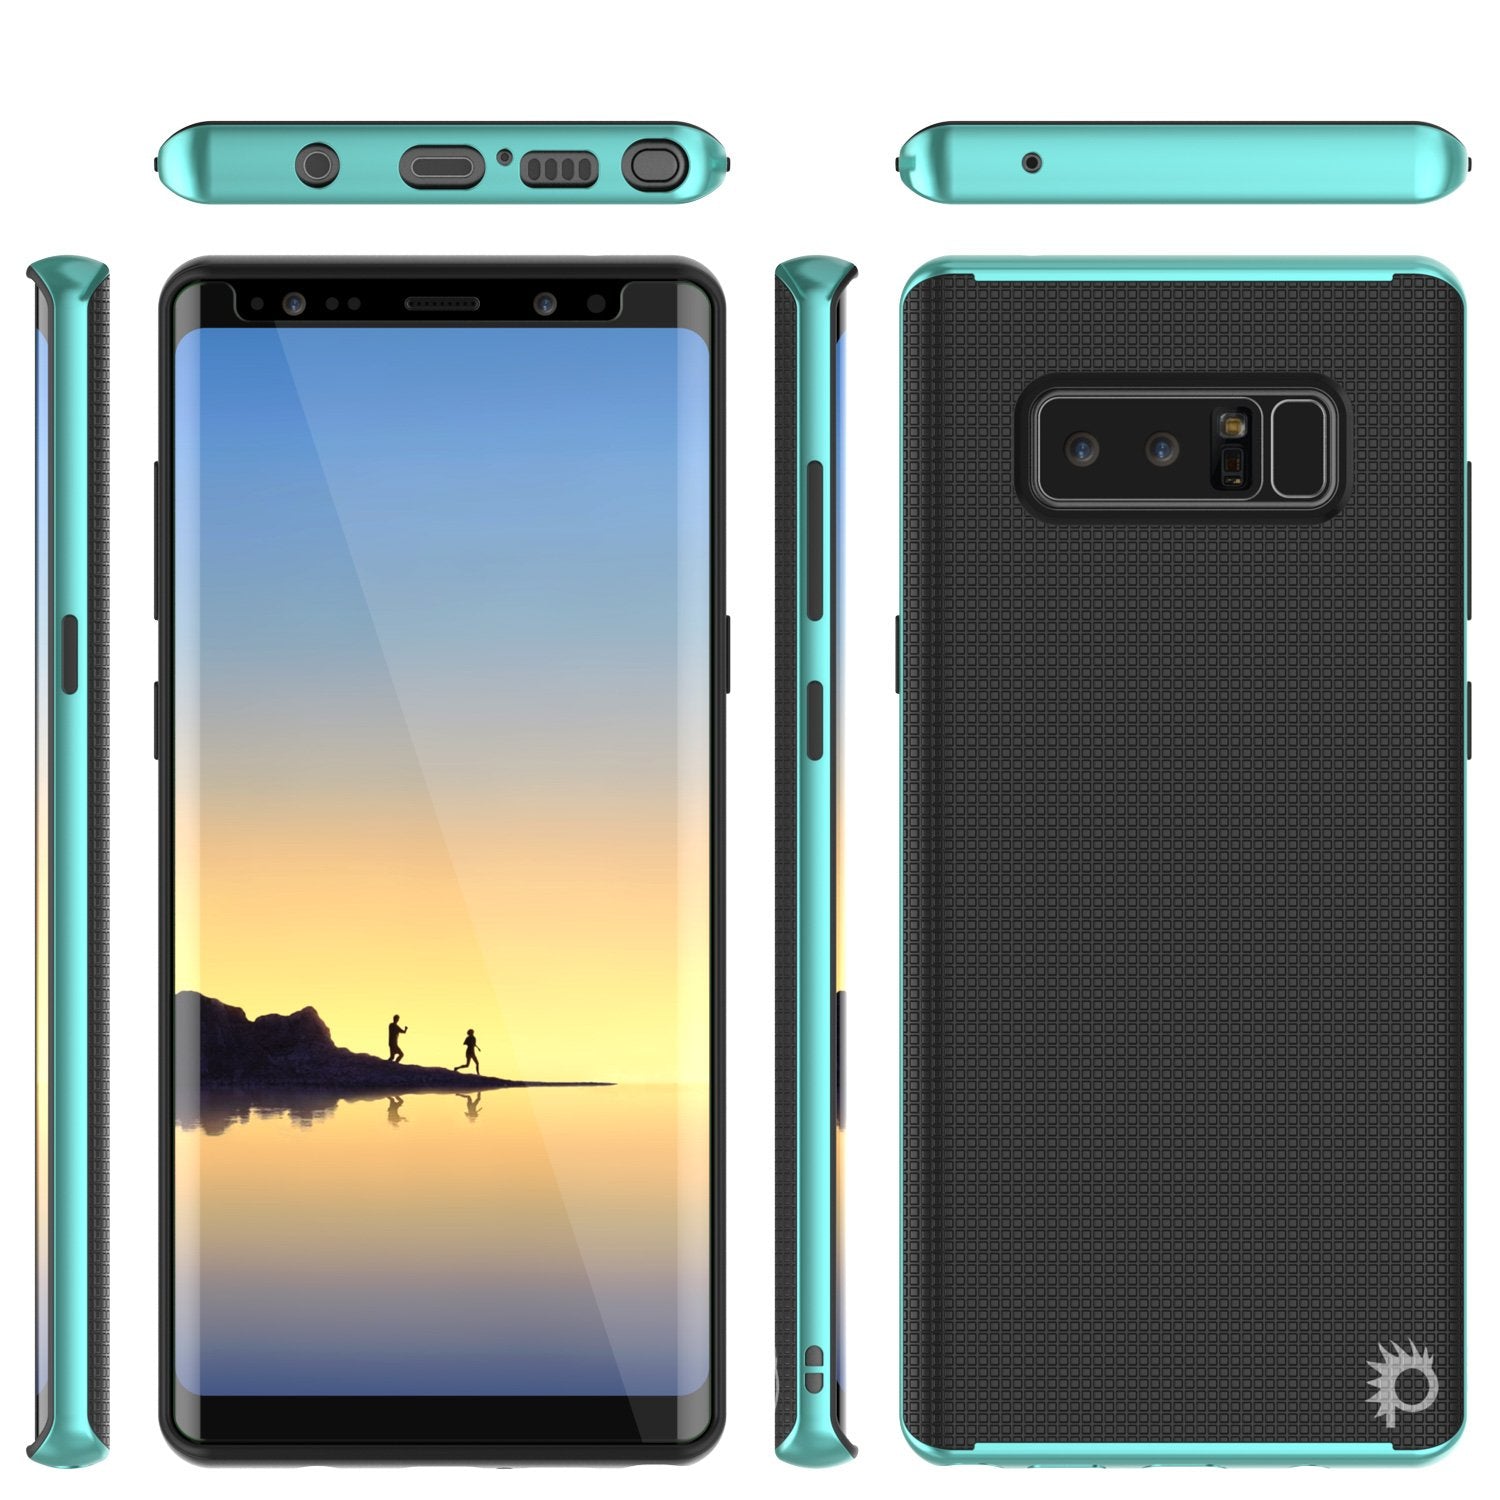 Galaxy Note 8 Case, PunkCase Stealth Teal Series Hybrid 3-Piece Shockproof Dual Layer Cover